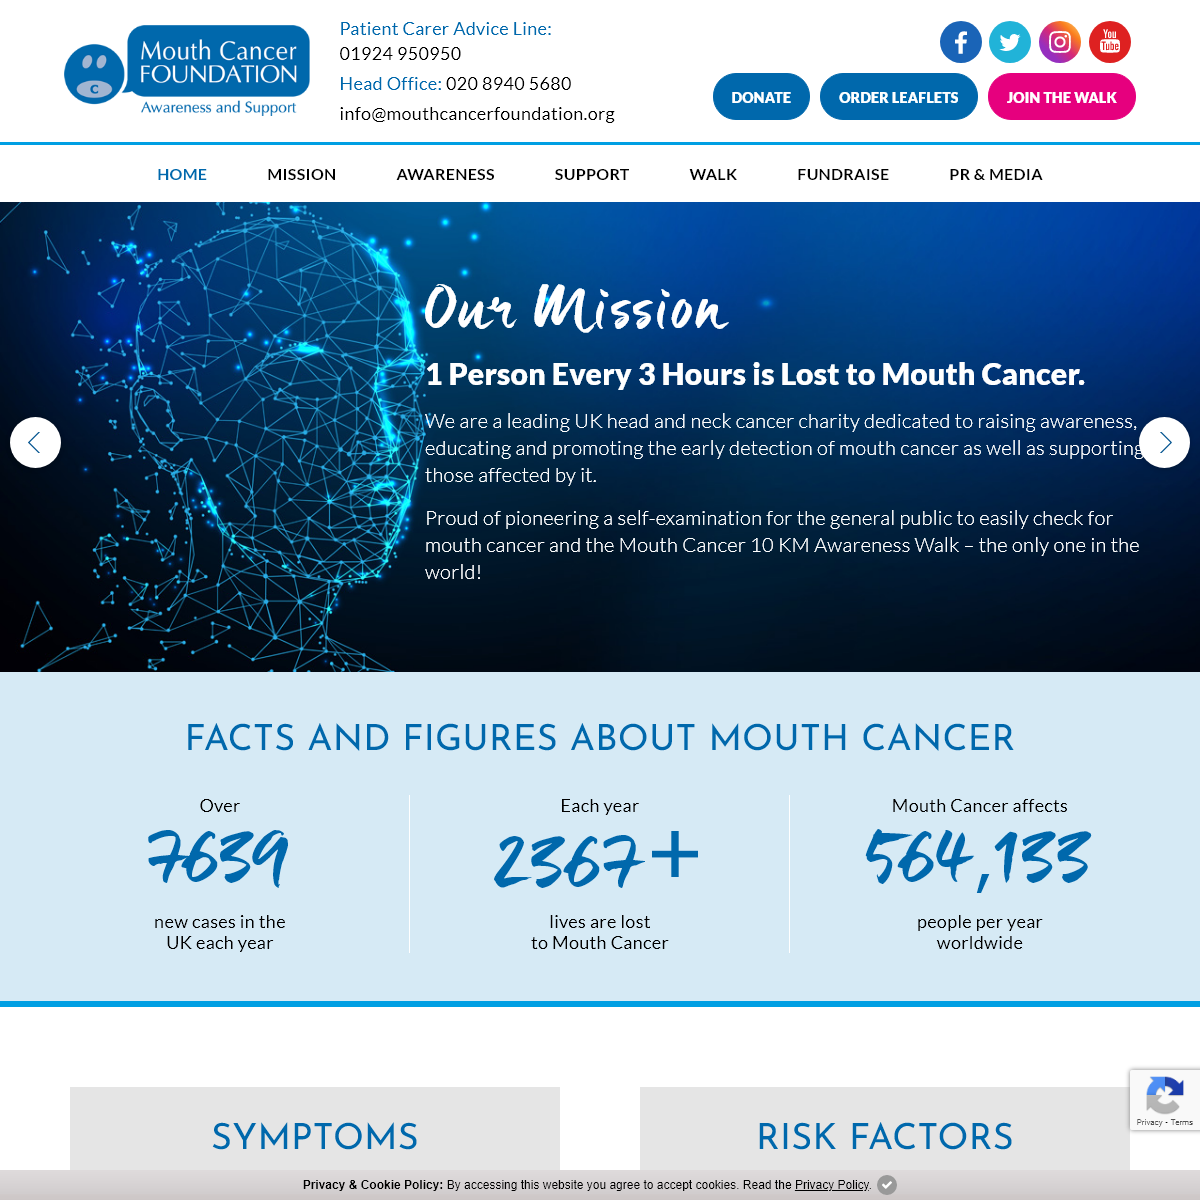 A complete backup of mouthcancerfoundation.org